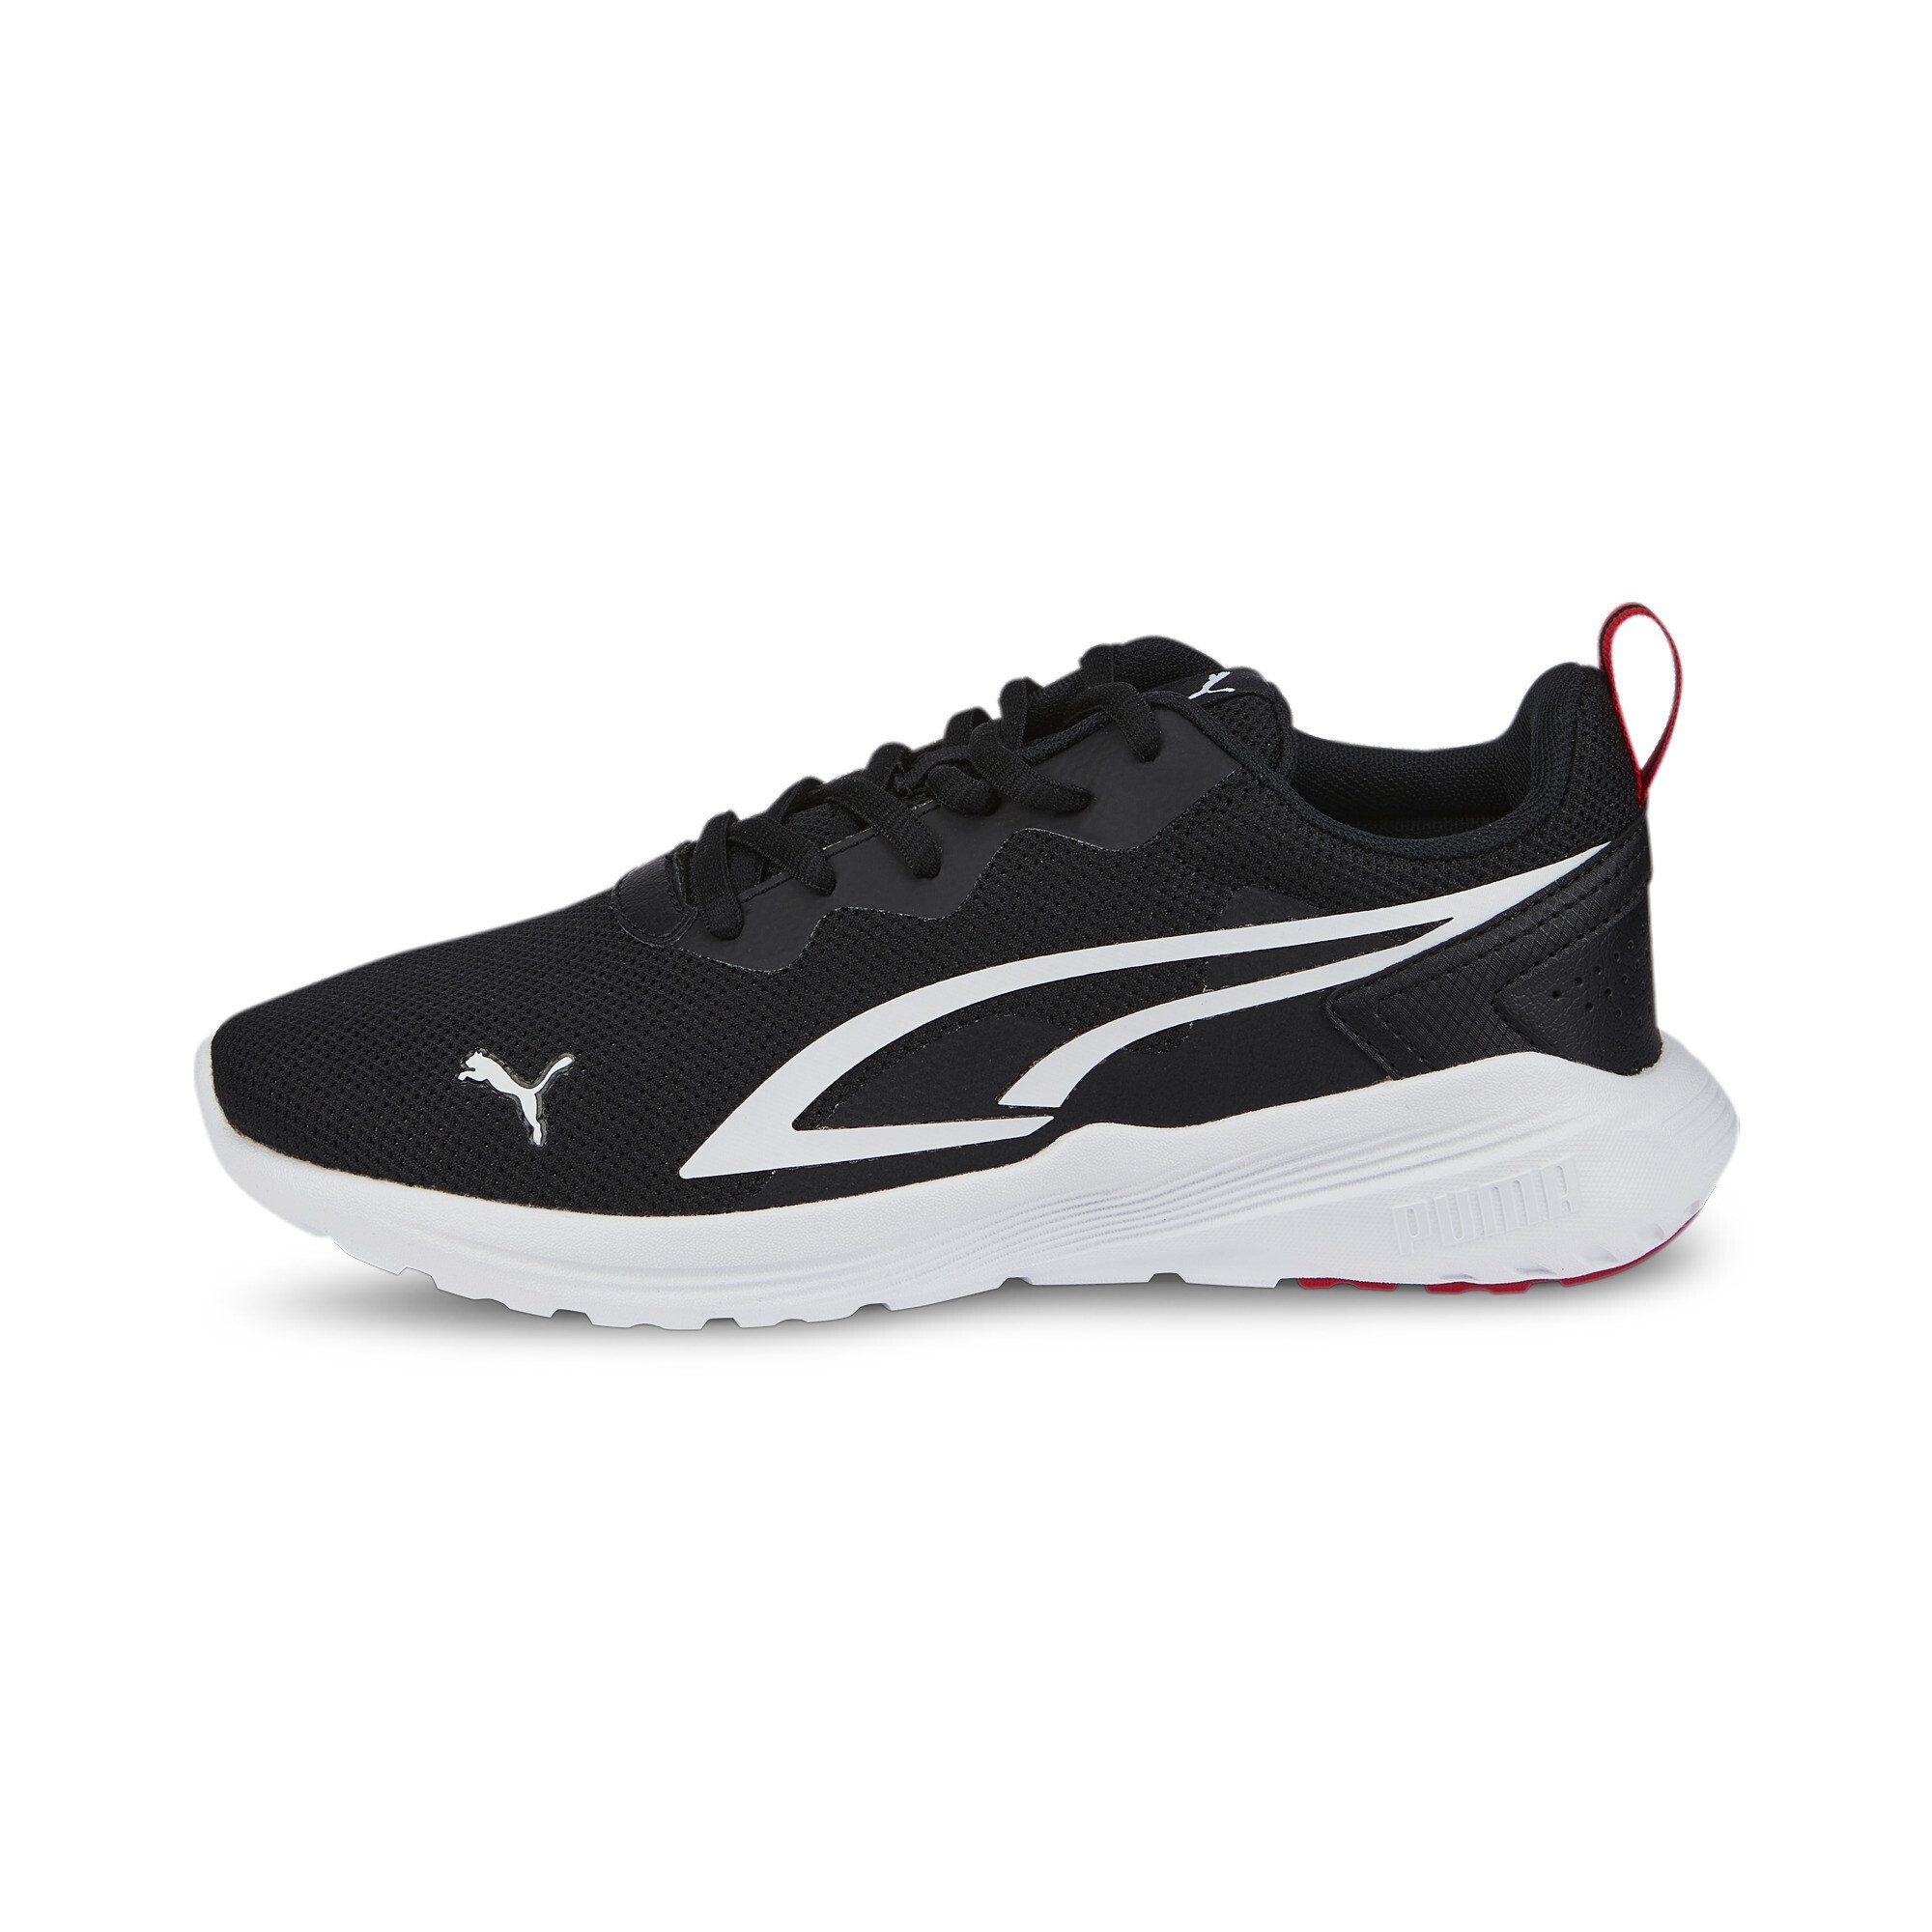 PUMA All Day White Black Sneakers Jugendliche Active Sneaker